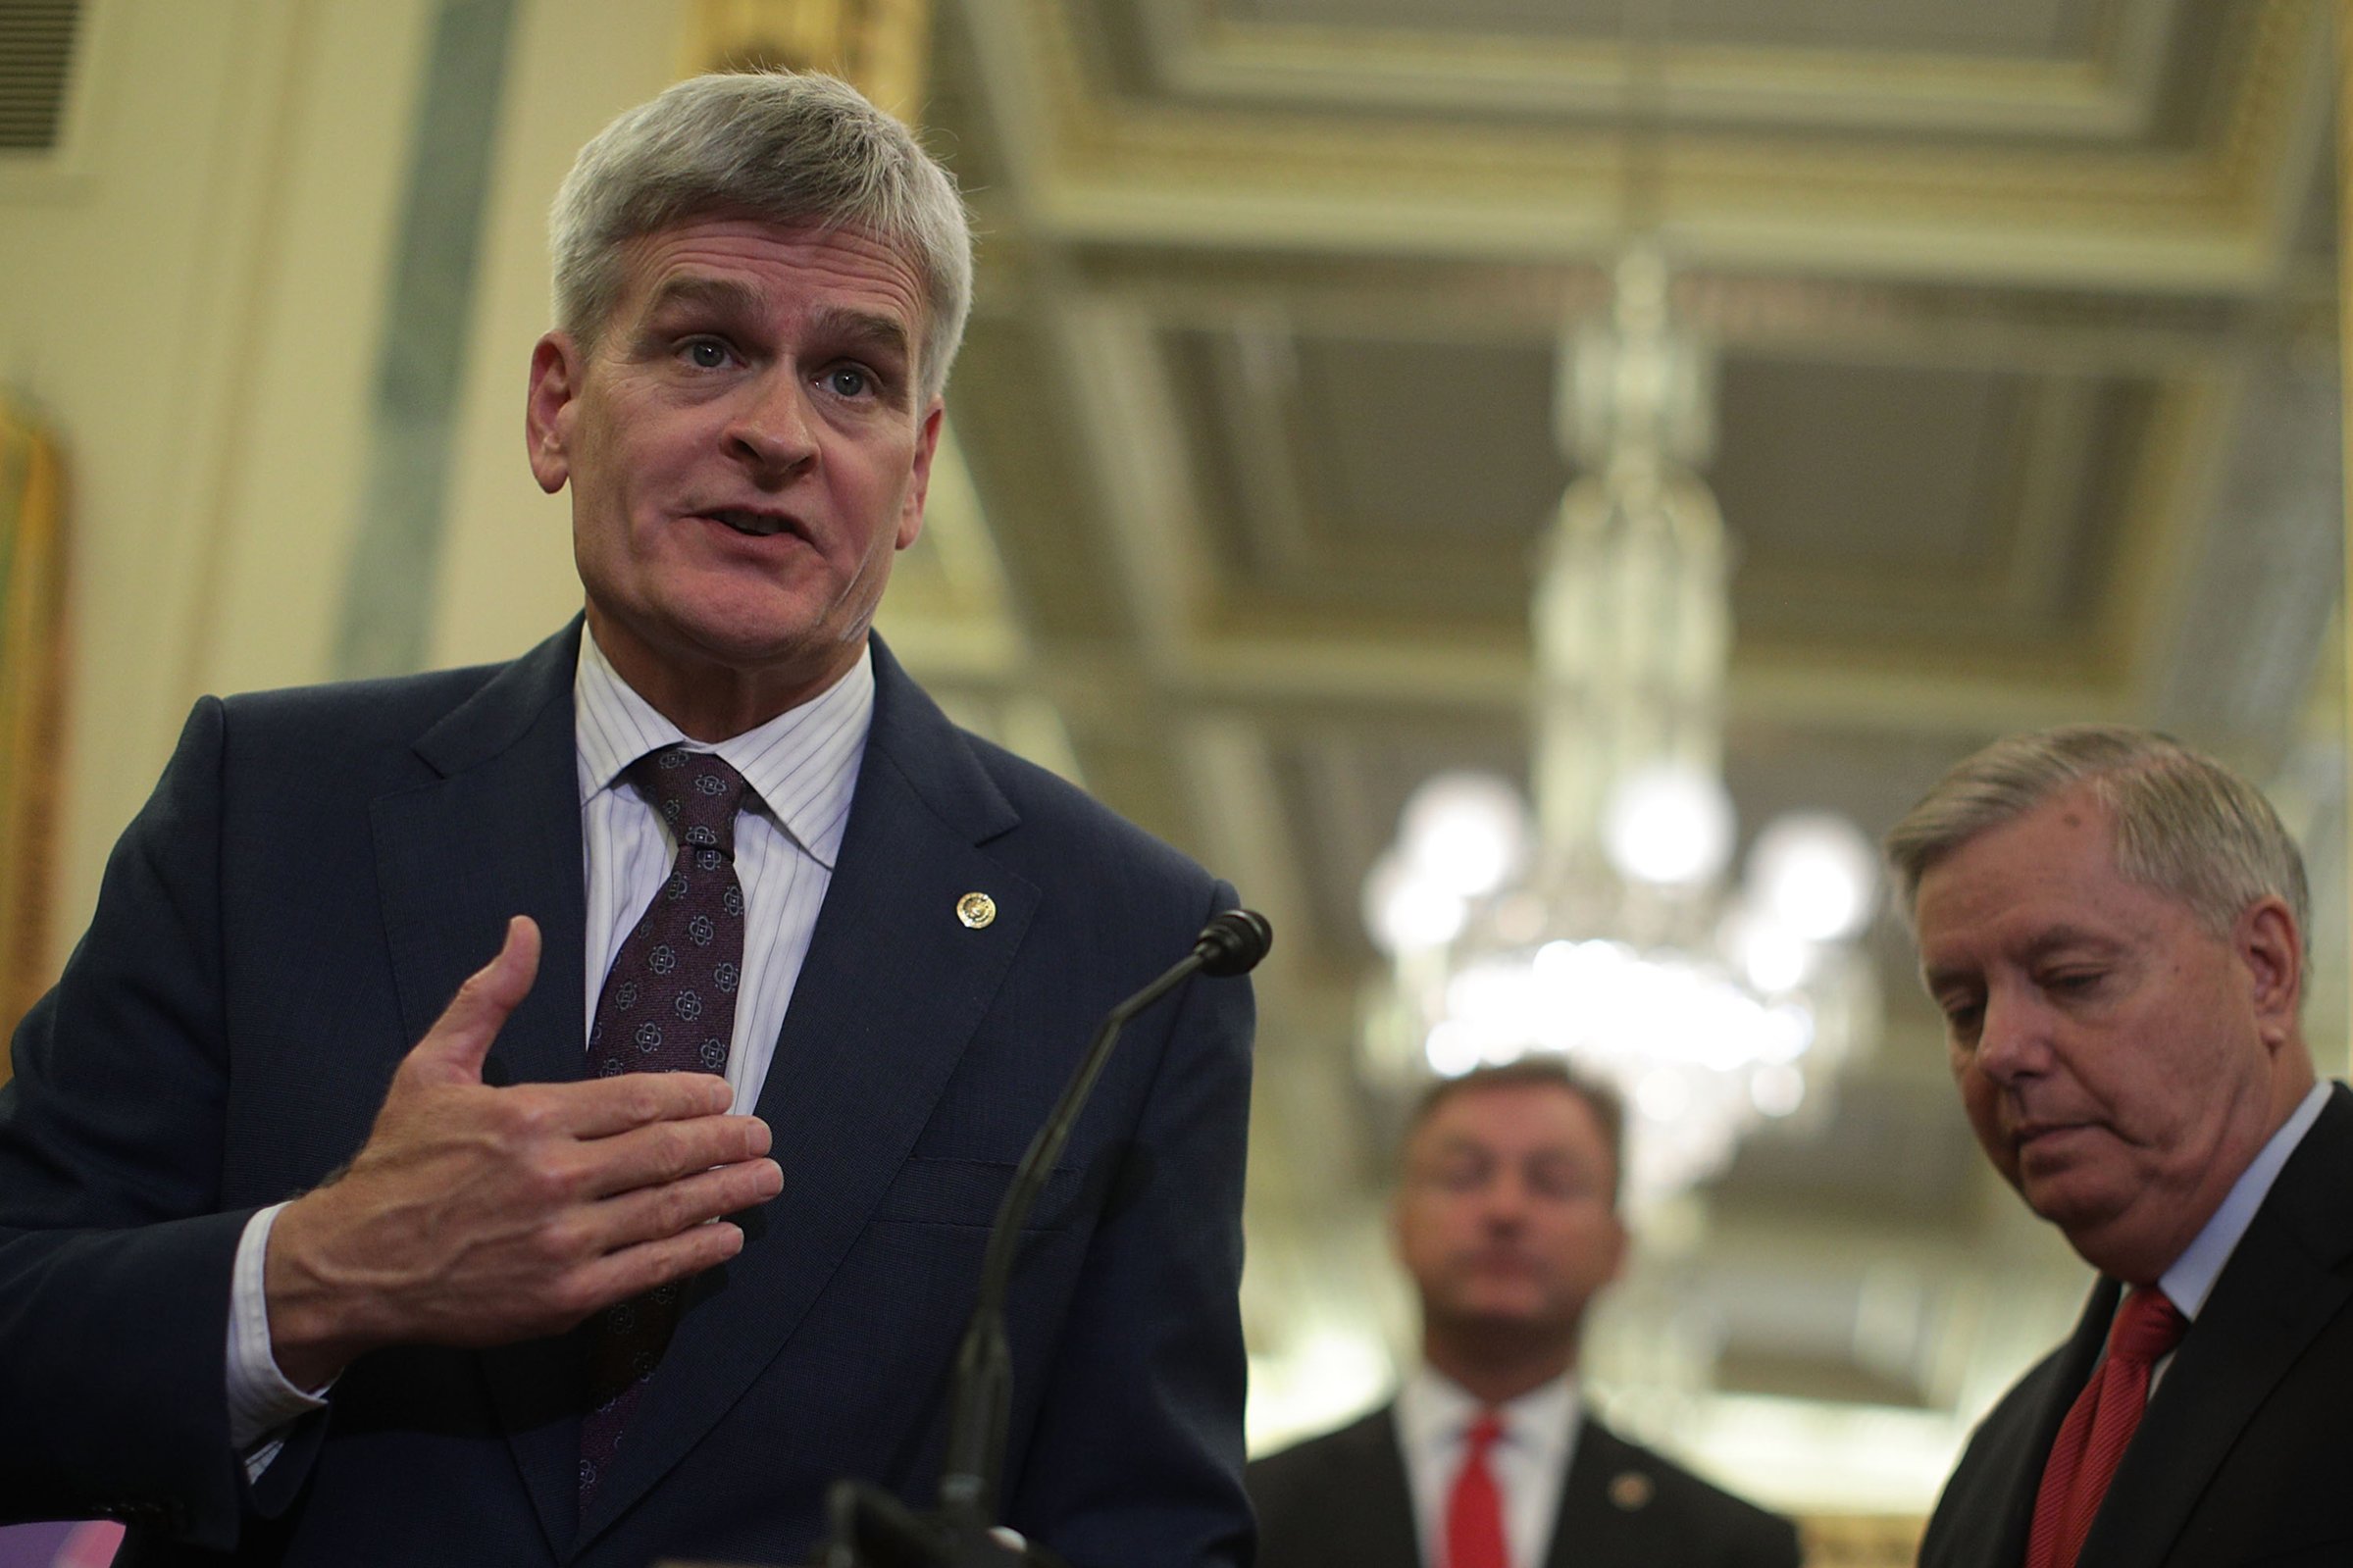 Sen. Bill Cassidy speaks as Sen. Dean Hellerand (center) and Sen. Lindsey Graham (right) listen during a news conference on health care Sept. 13, 2017 on Capitol Hill in Washington. Senators Graham, Cassidy, Heller and Johnson unveiled a proposed legislation to repeal and replace the Obamacare.